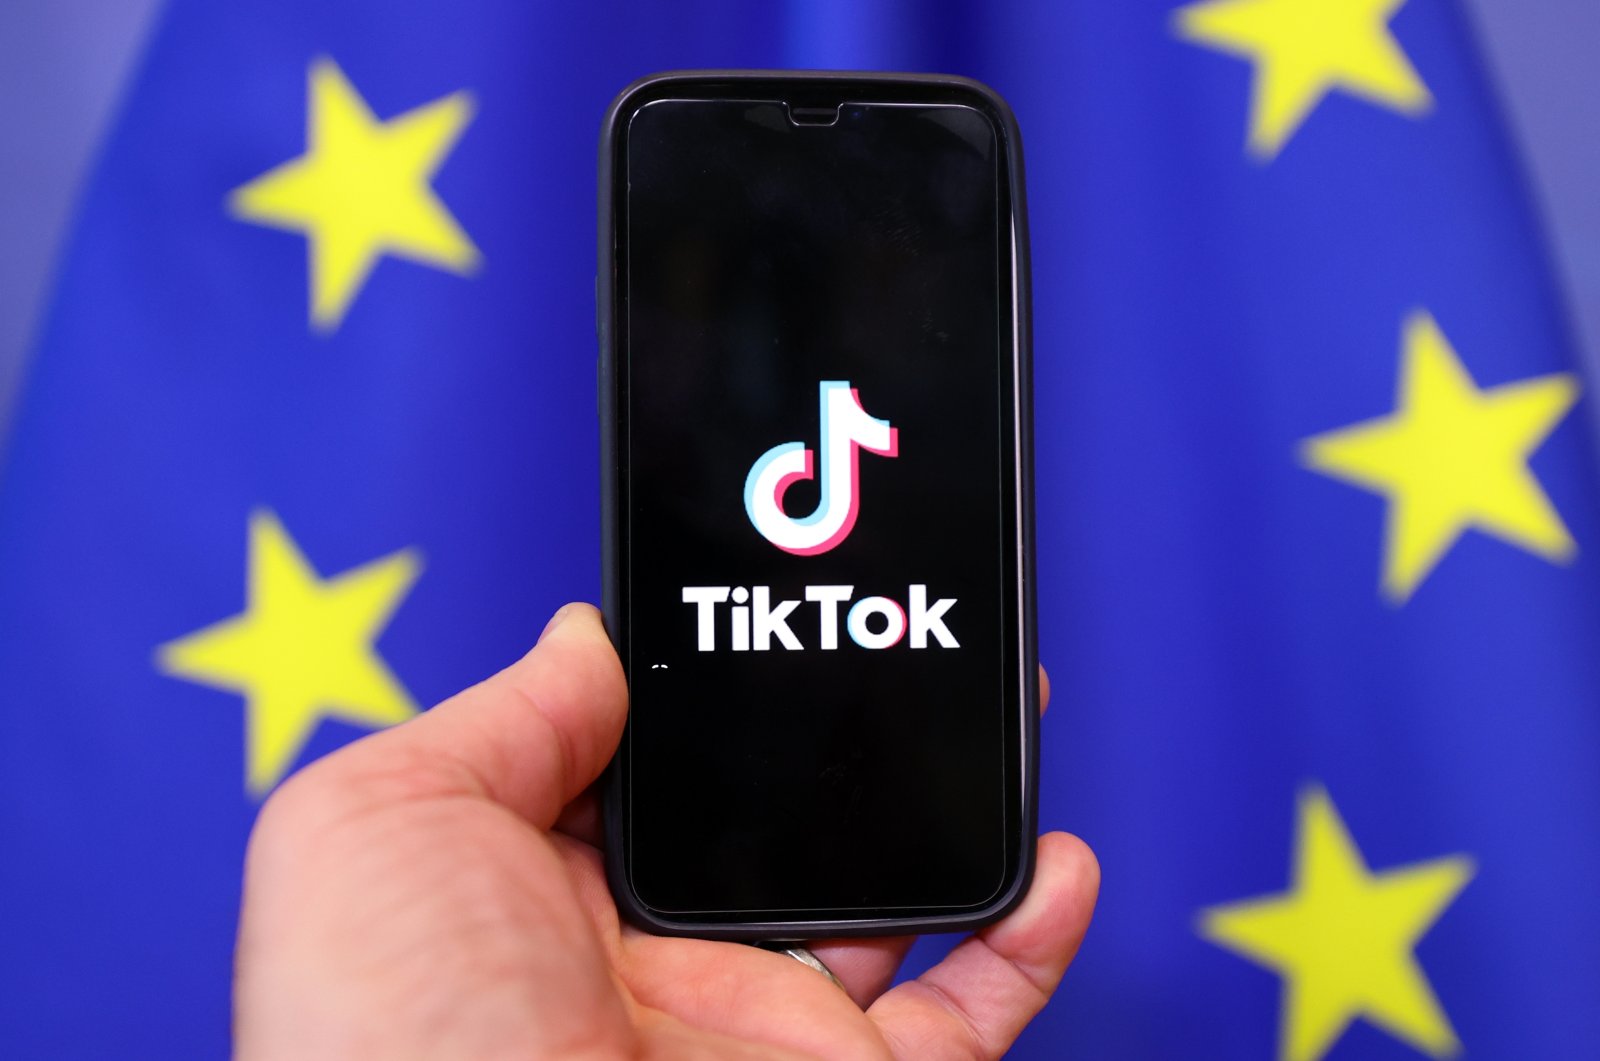 EU institutions ban TikTok on staff devices amid data privacy woes